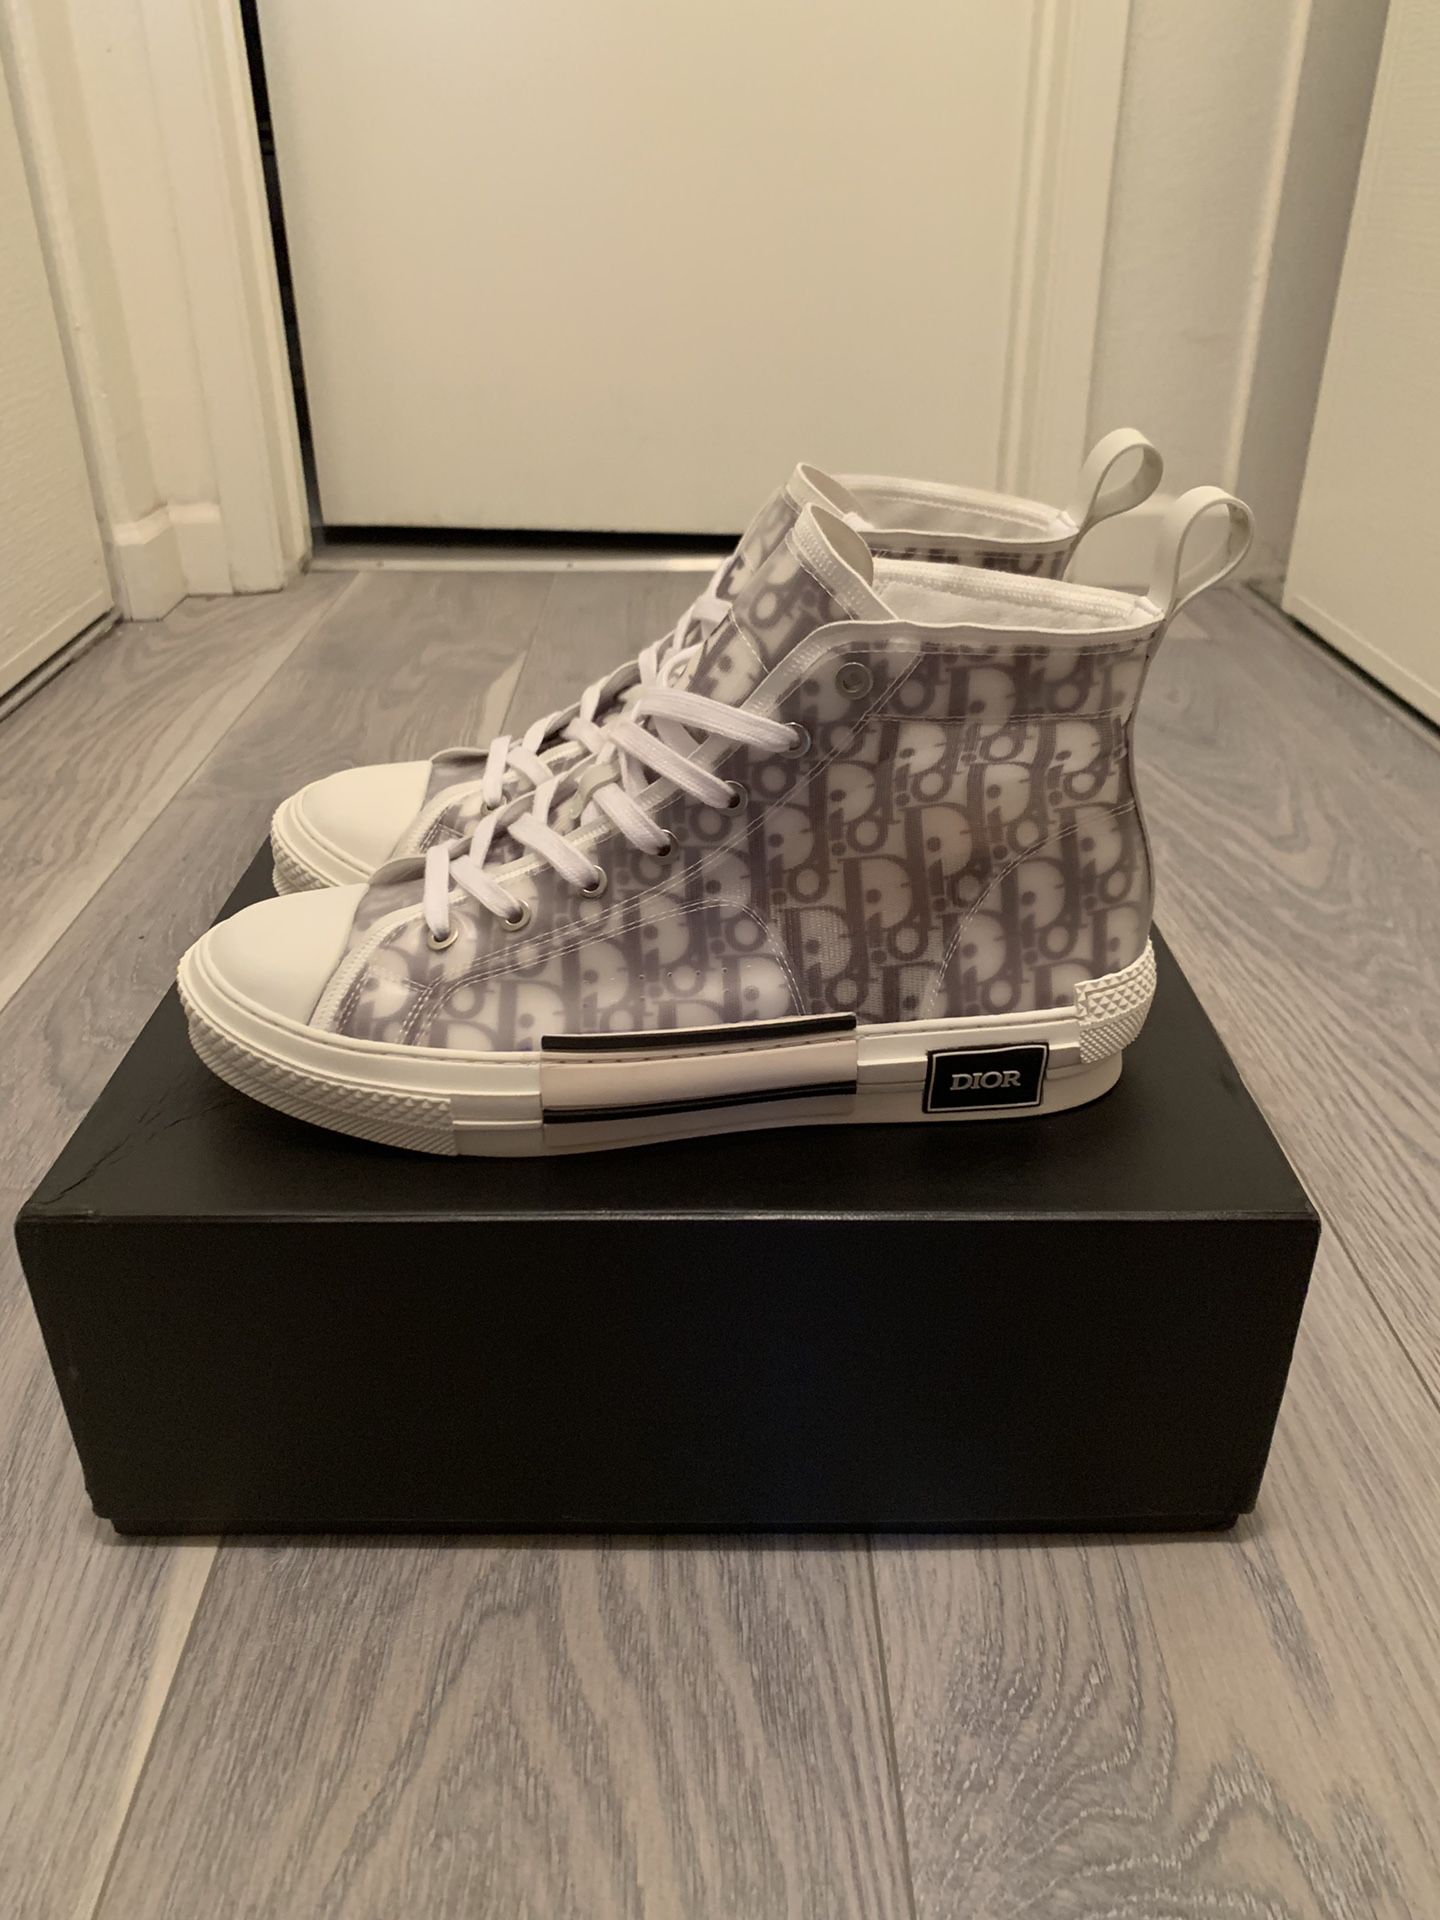 Dior converse for Sale in San Francisco, CA - OfferUp